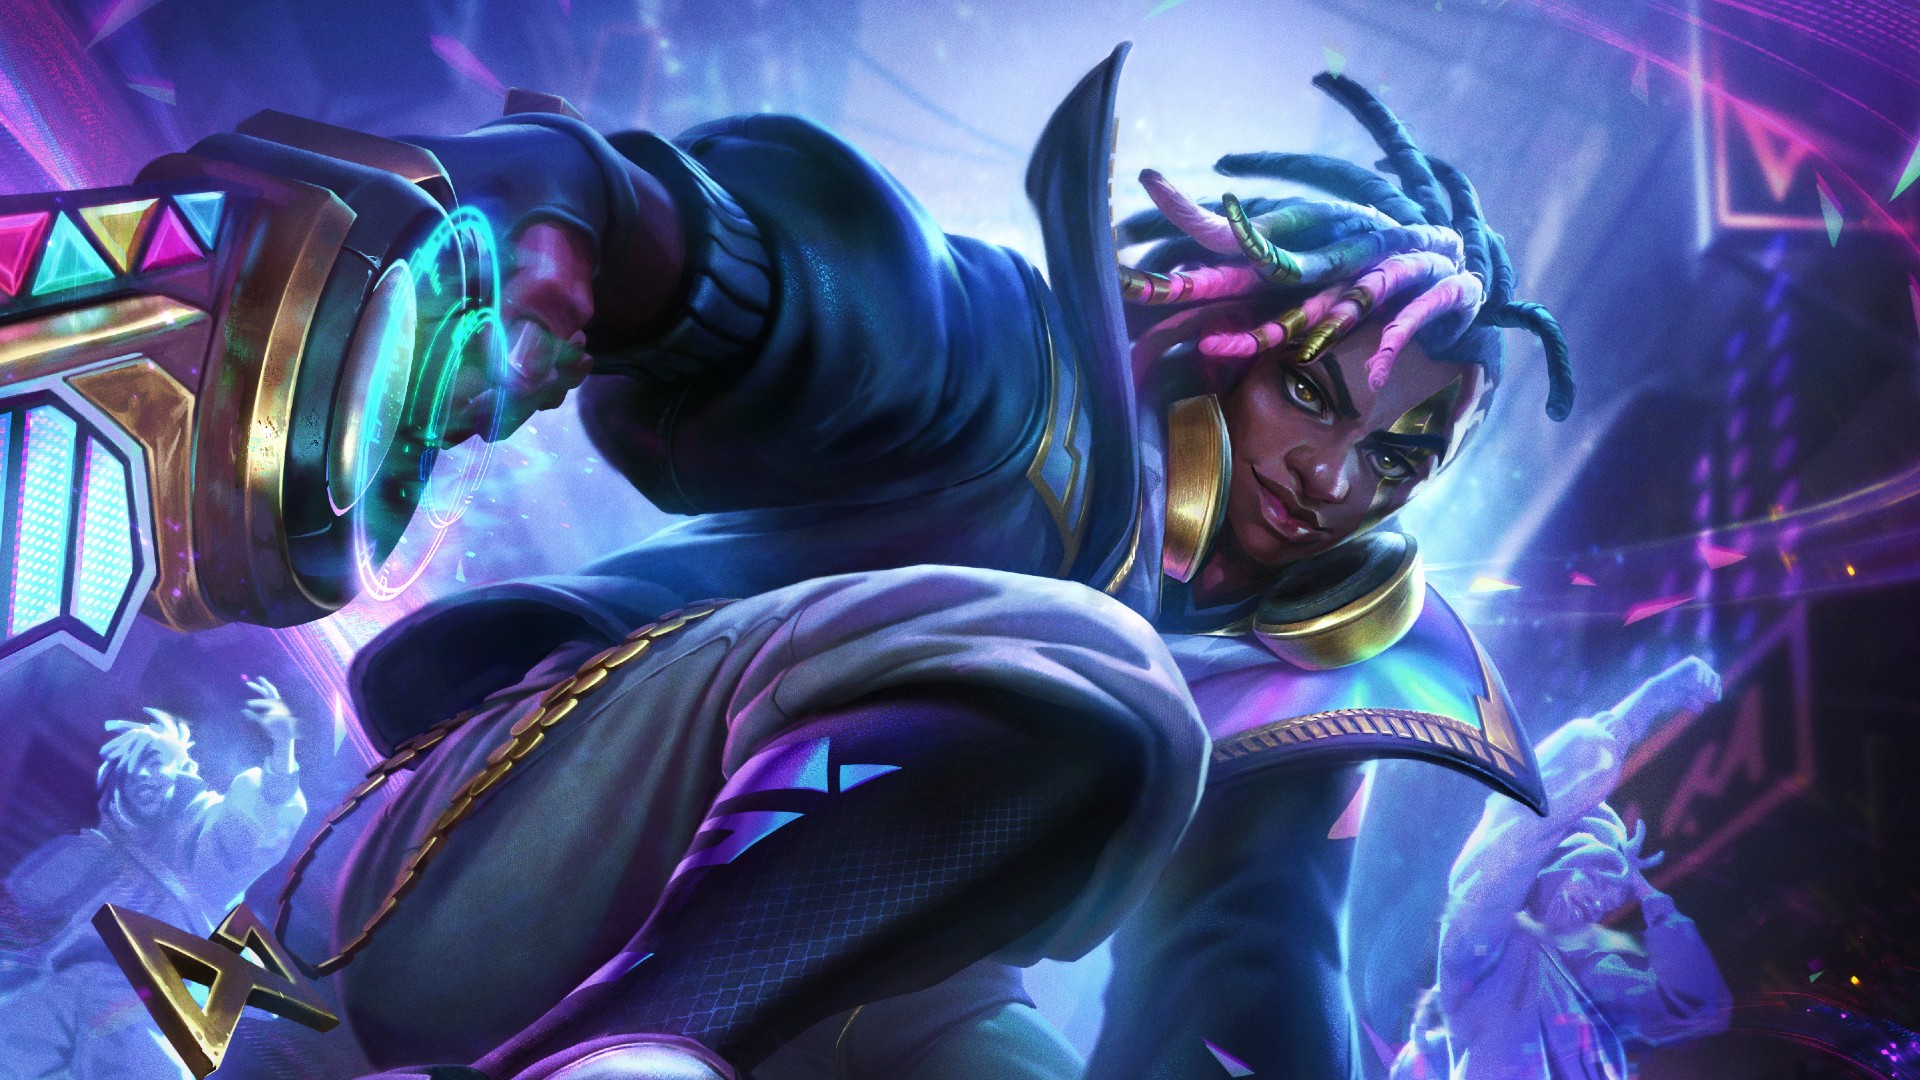 There’s a new $200 League of Legends chroma, and there might be more